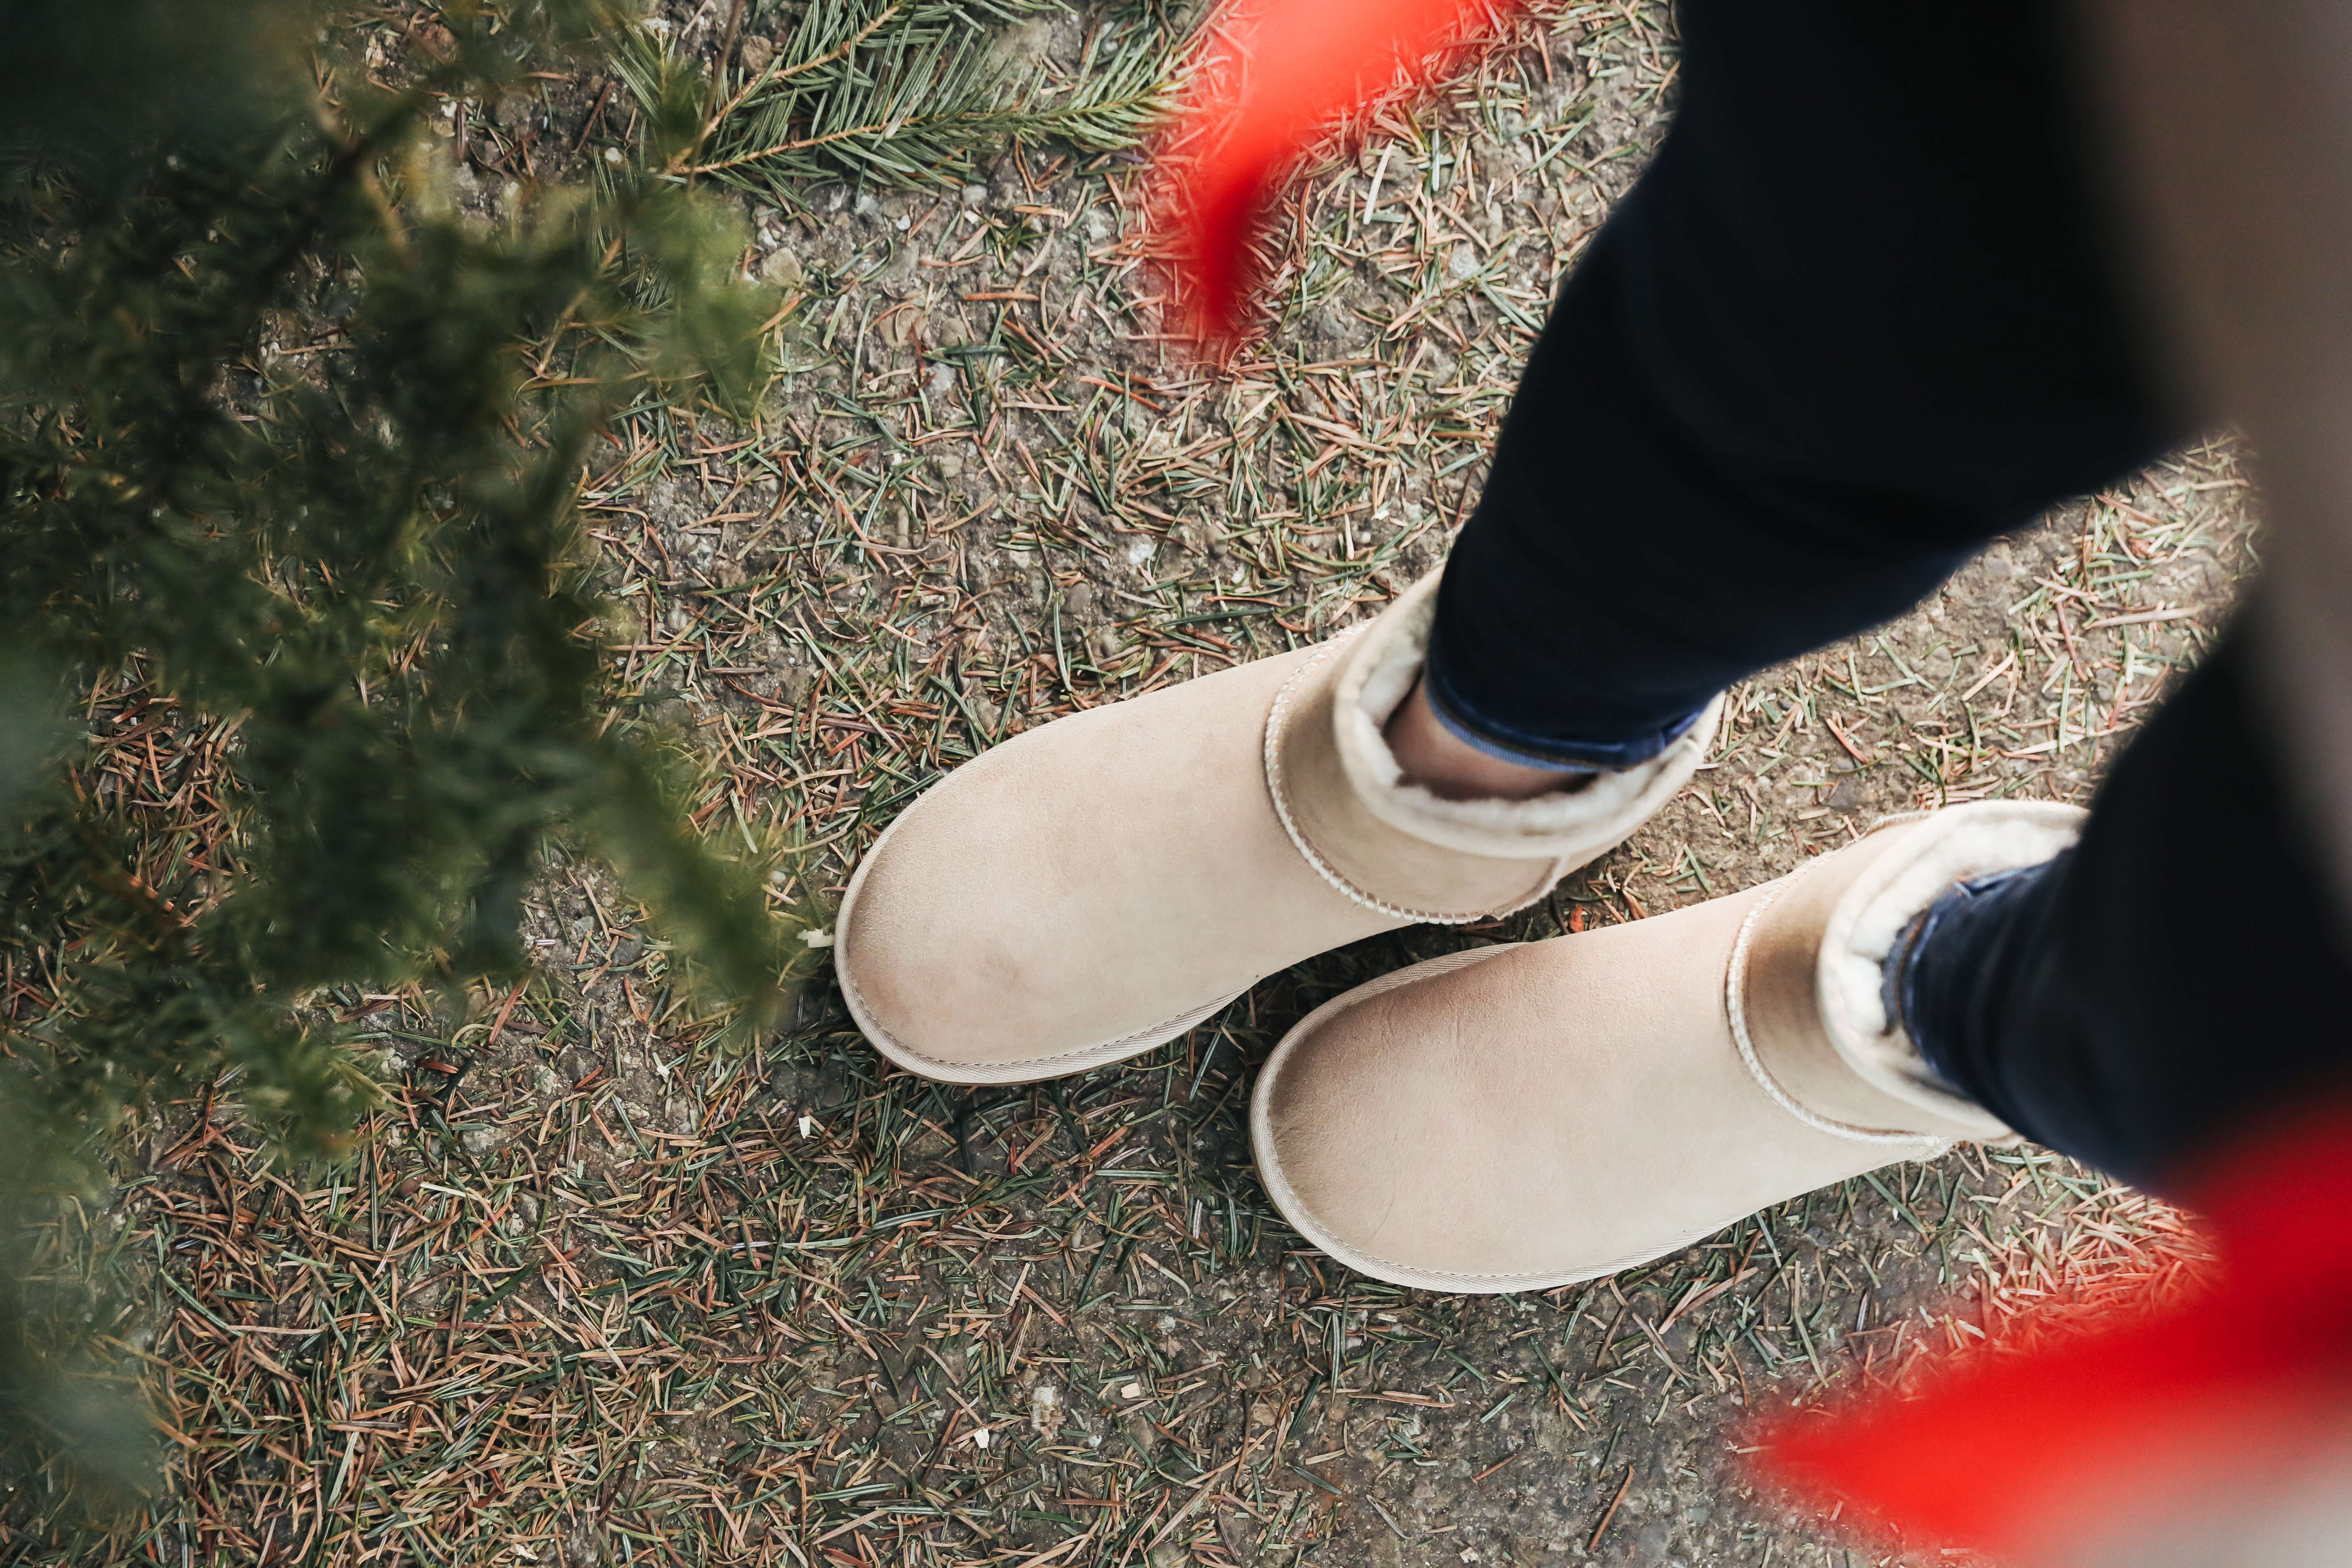 Feeling Festive in UGG Boots from Zappos.com.